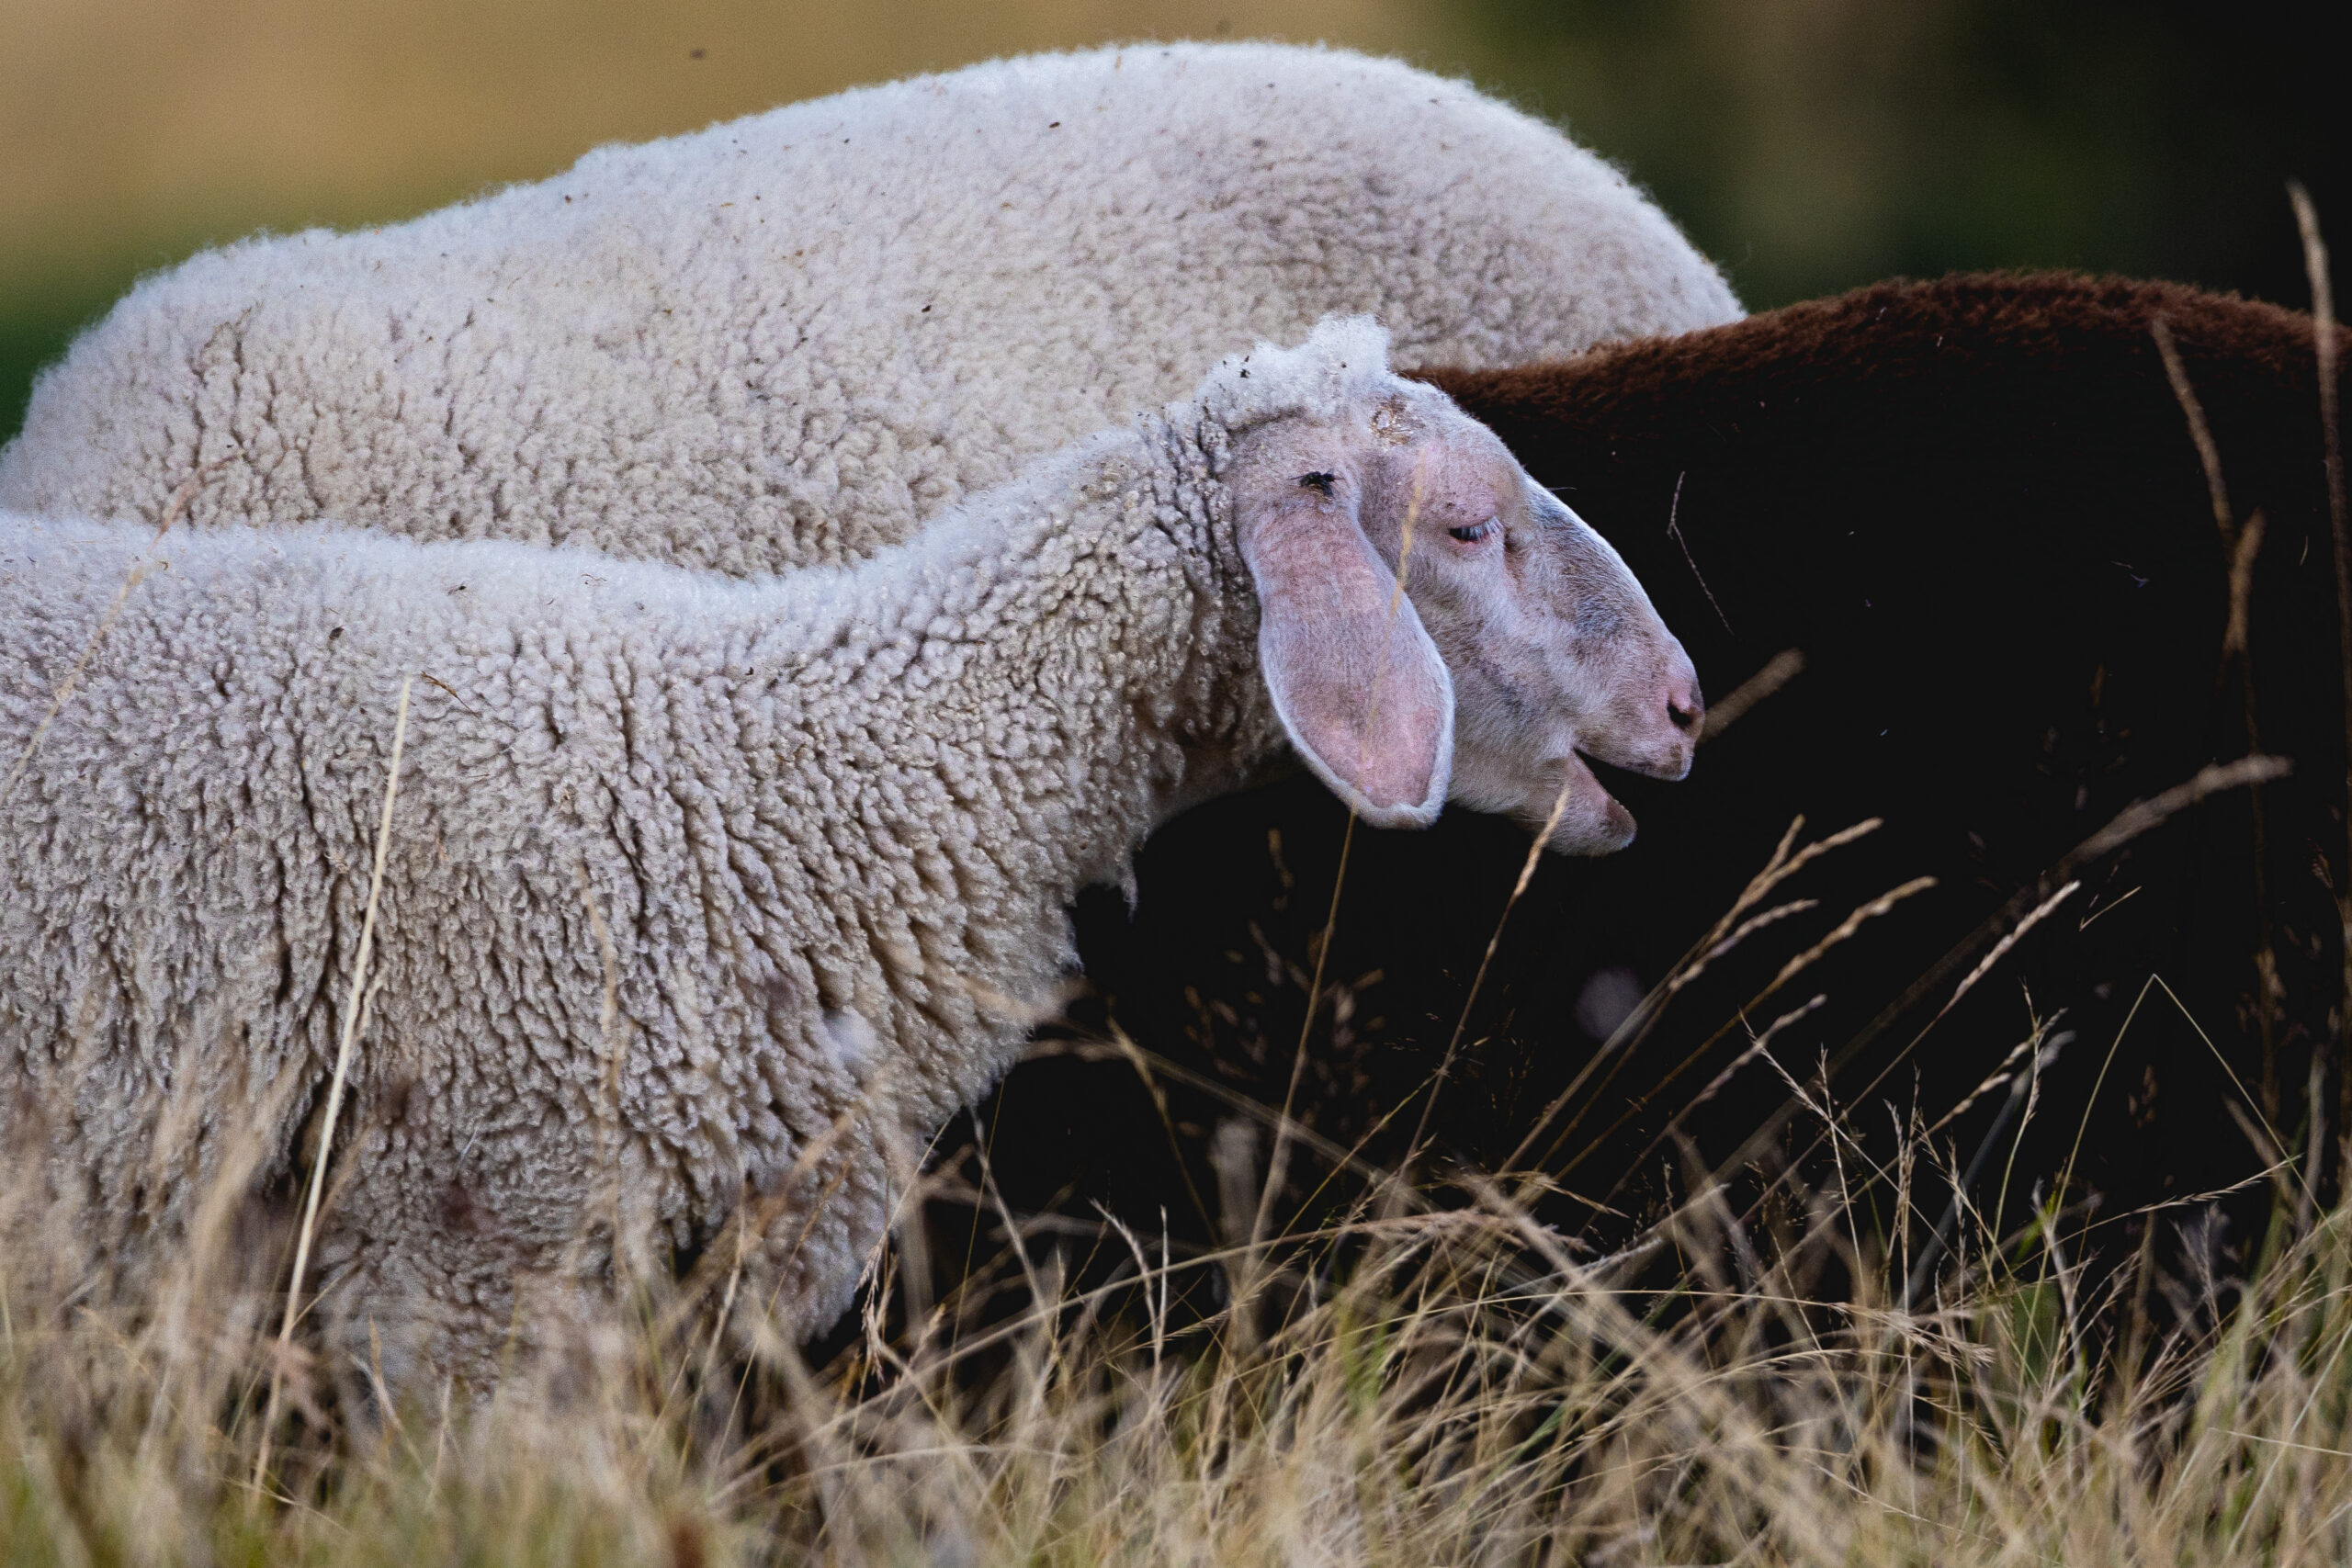 The Lost Sheep: Finding Meaning In The Parable Of The Shepherd (Luke 15:3-7 - The Parable Of The Lost Sheep)